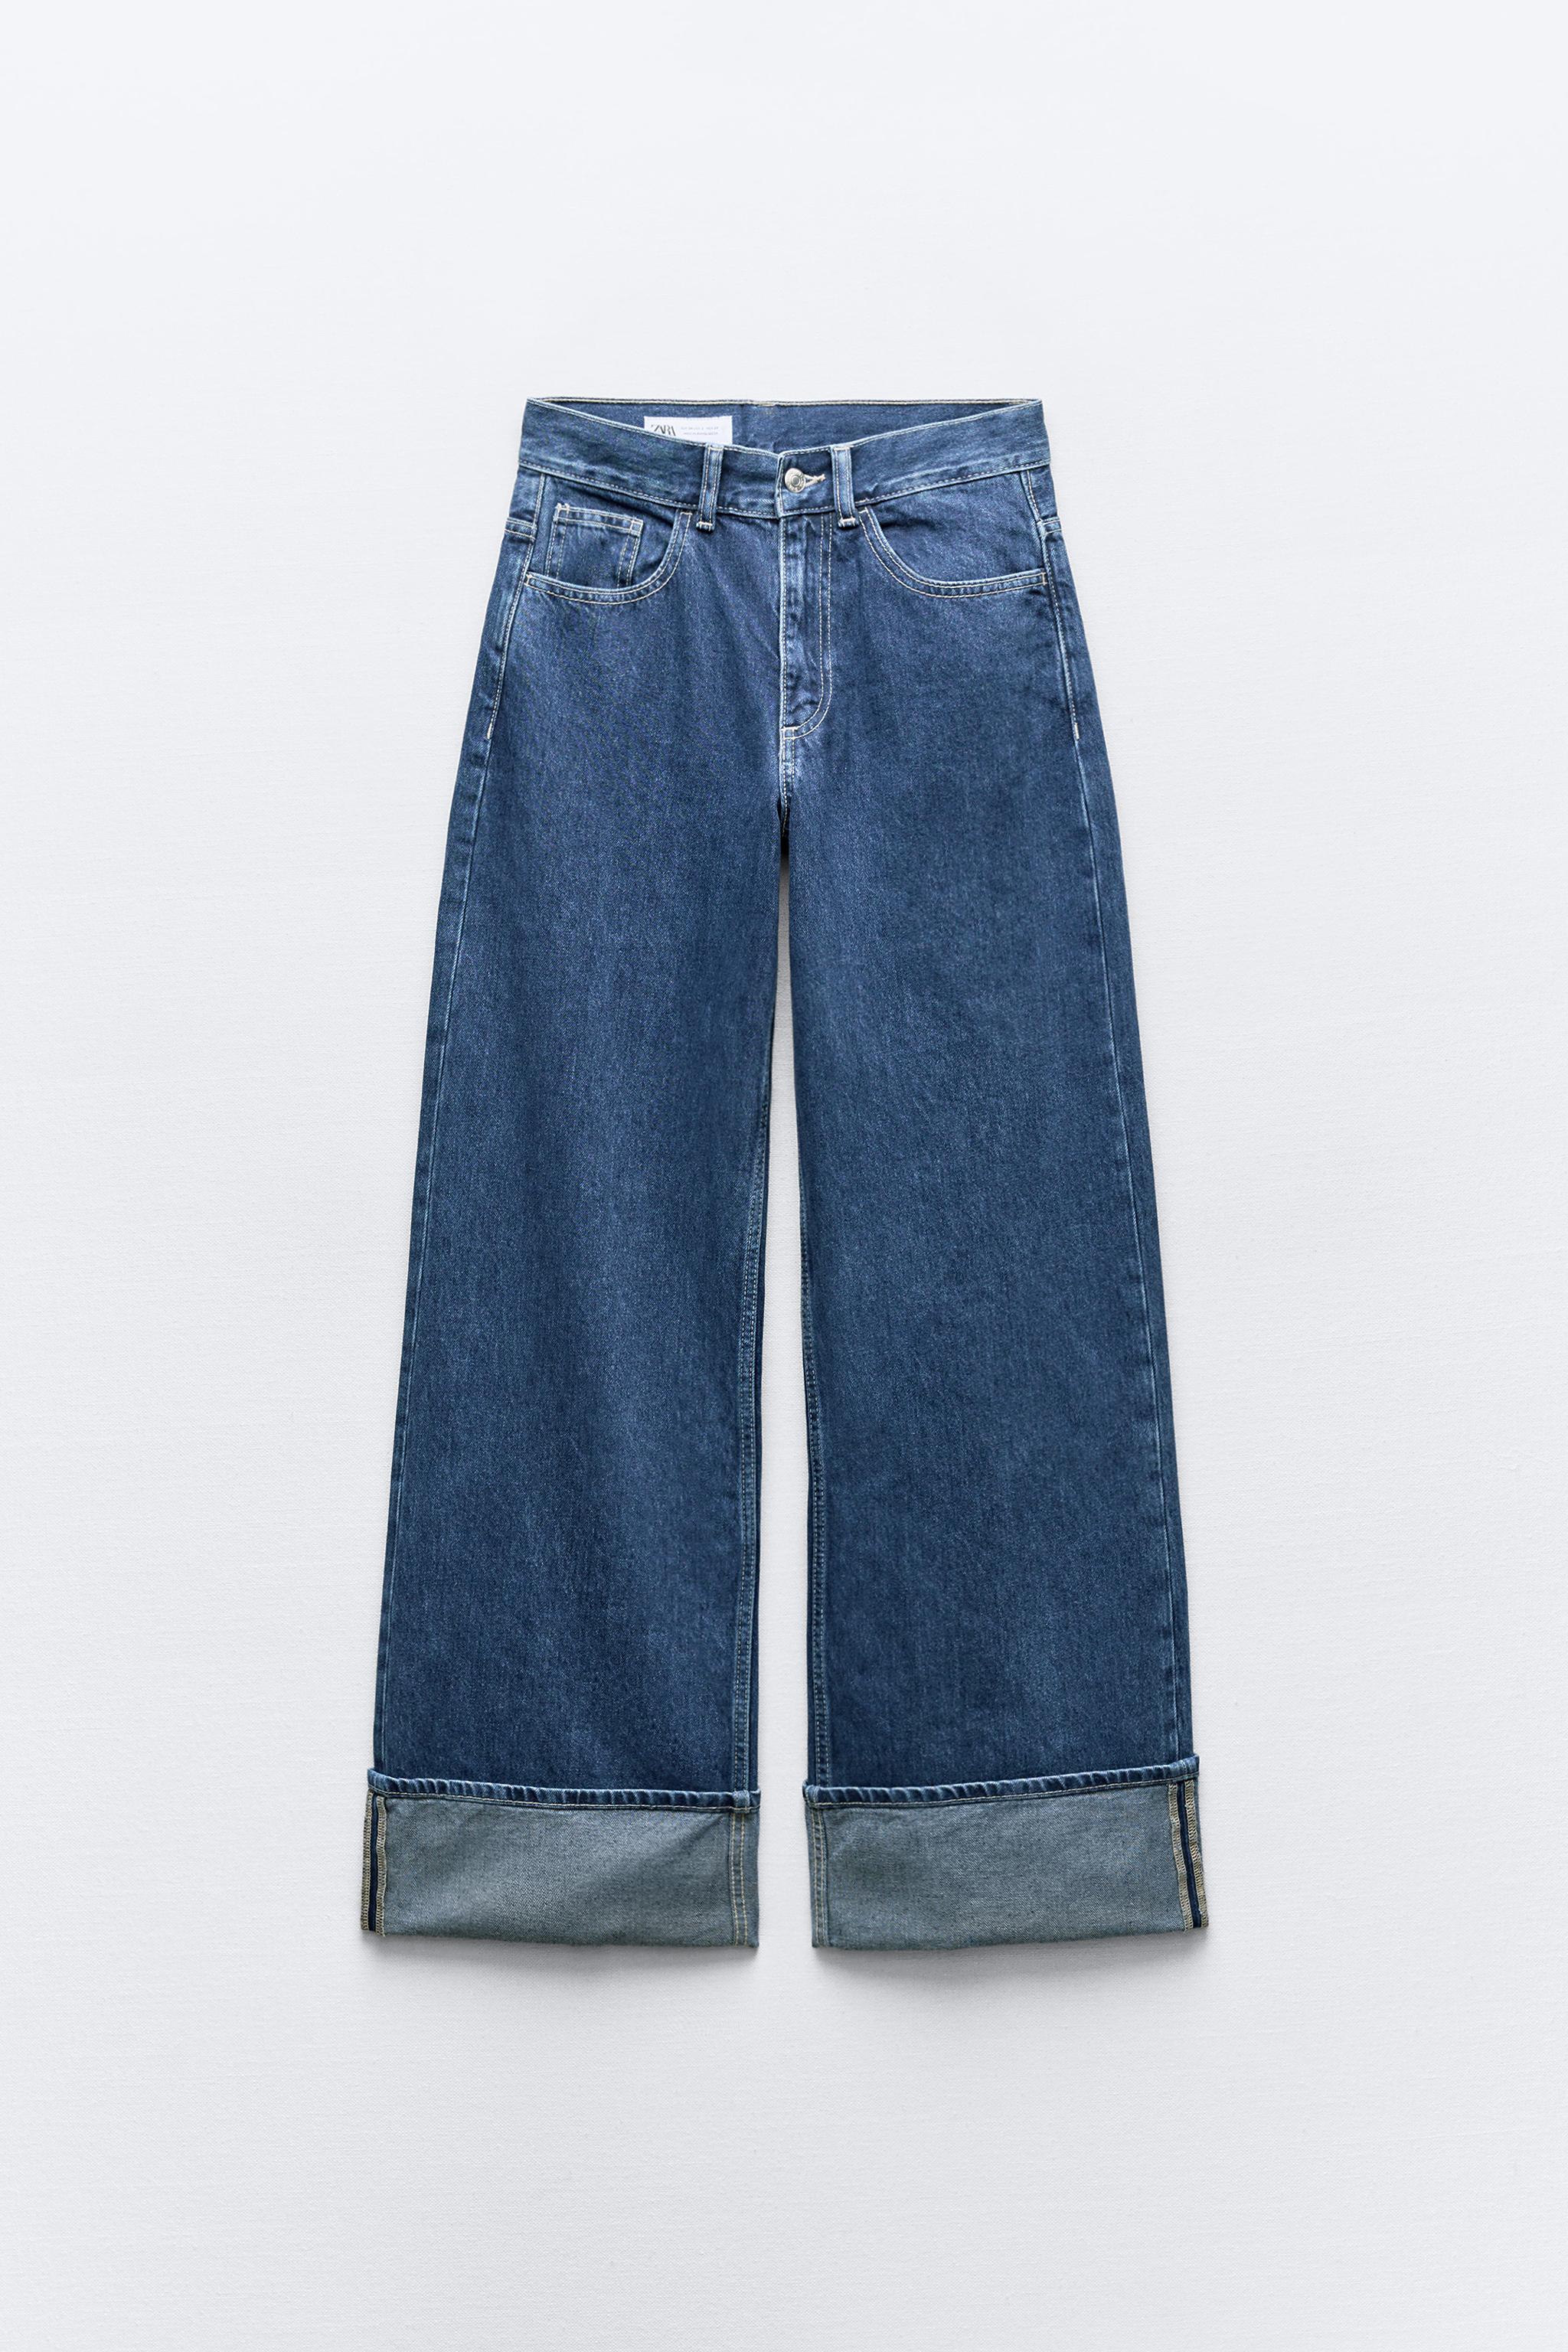 TRF HIGH WAIST TURNED UP JEANS